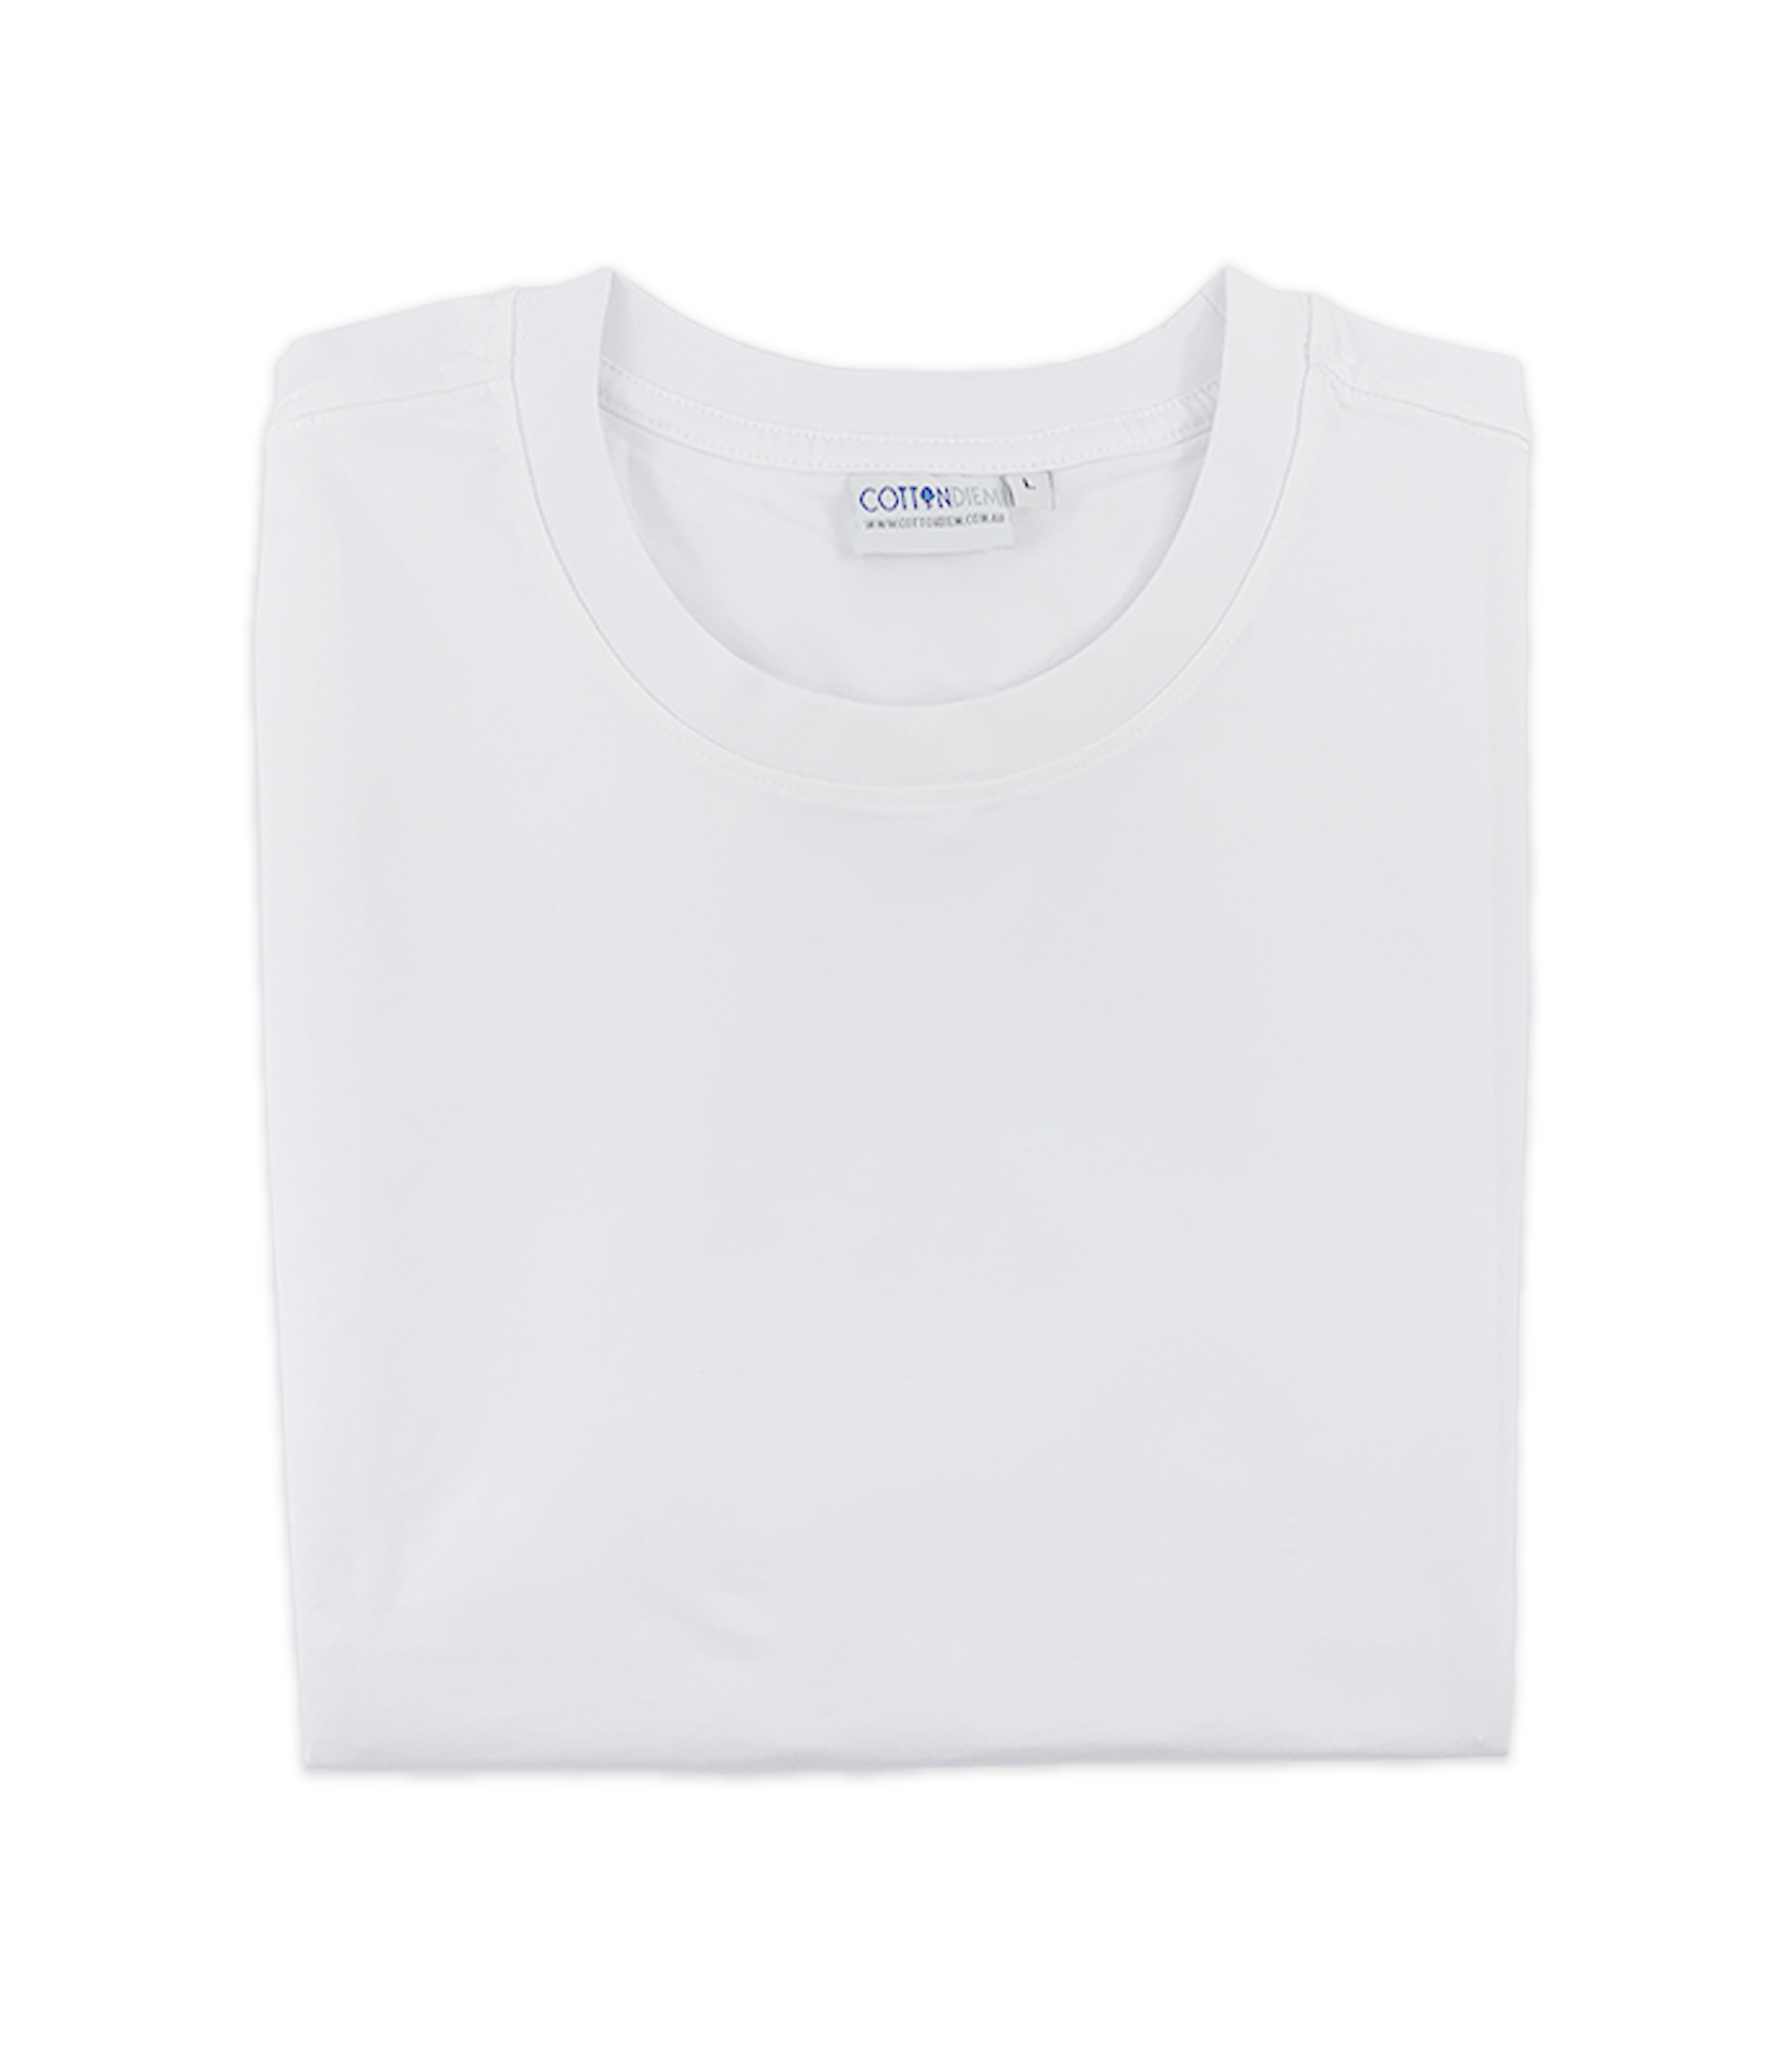 What are the best blank t-shirts for Cricut infusible ink? - COTTON DIEM